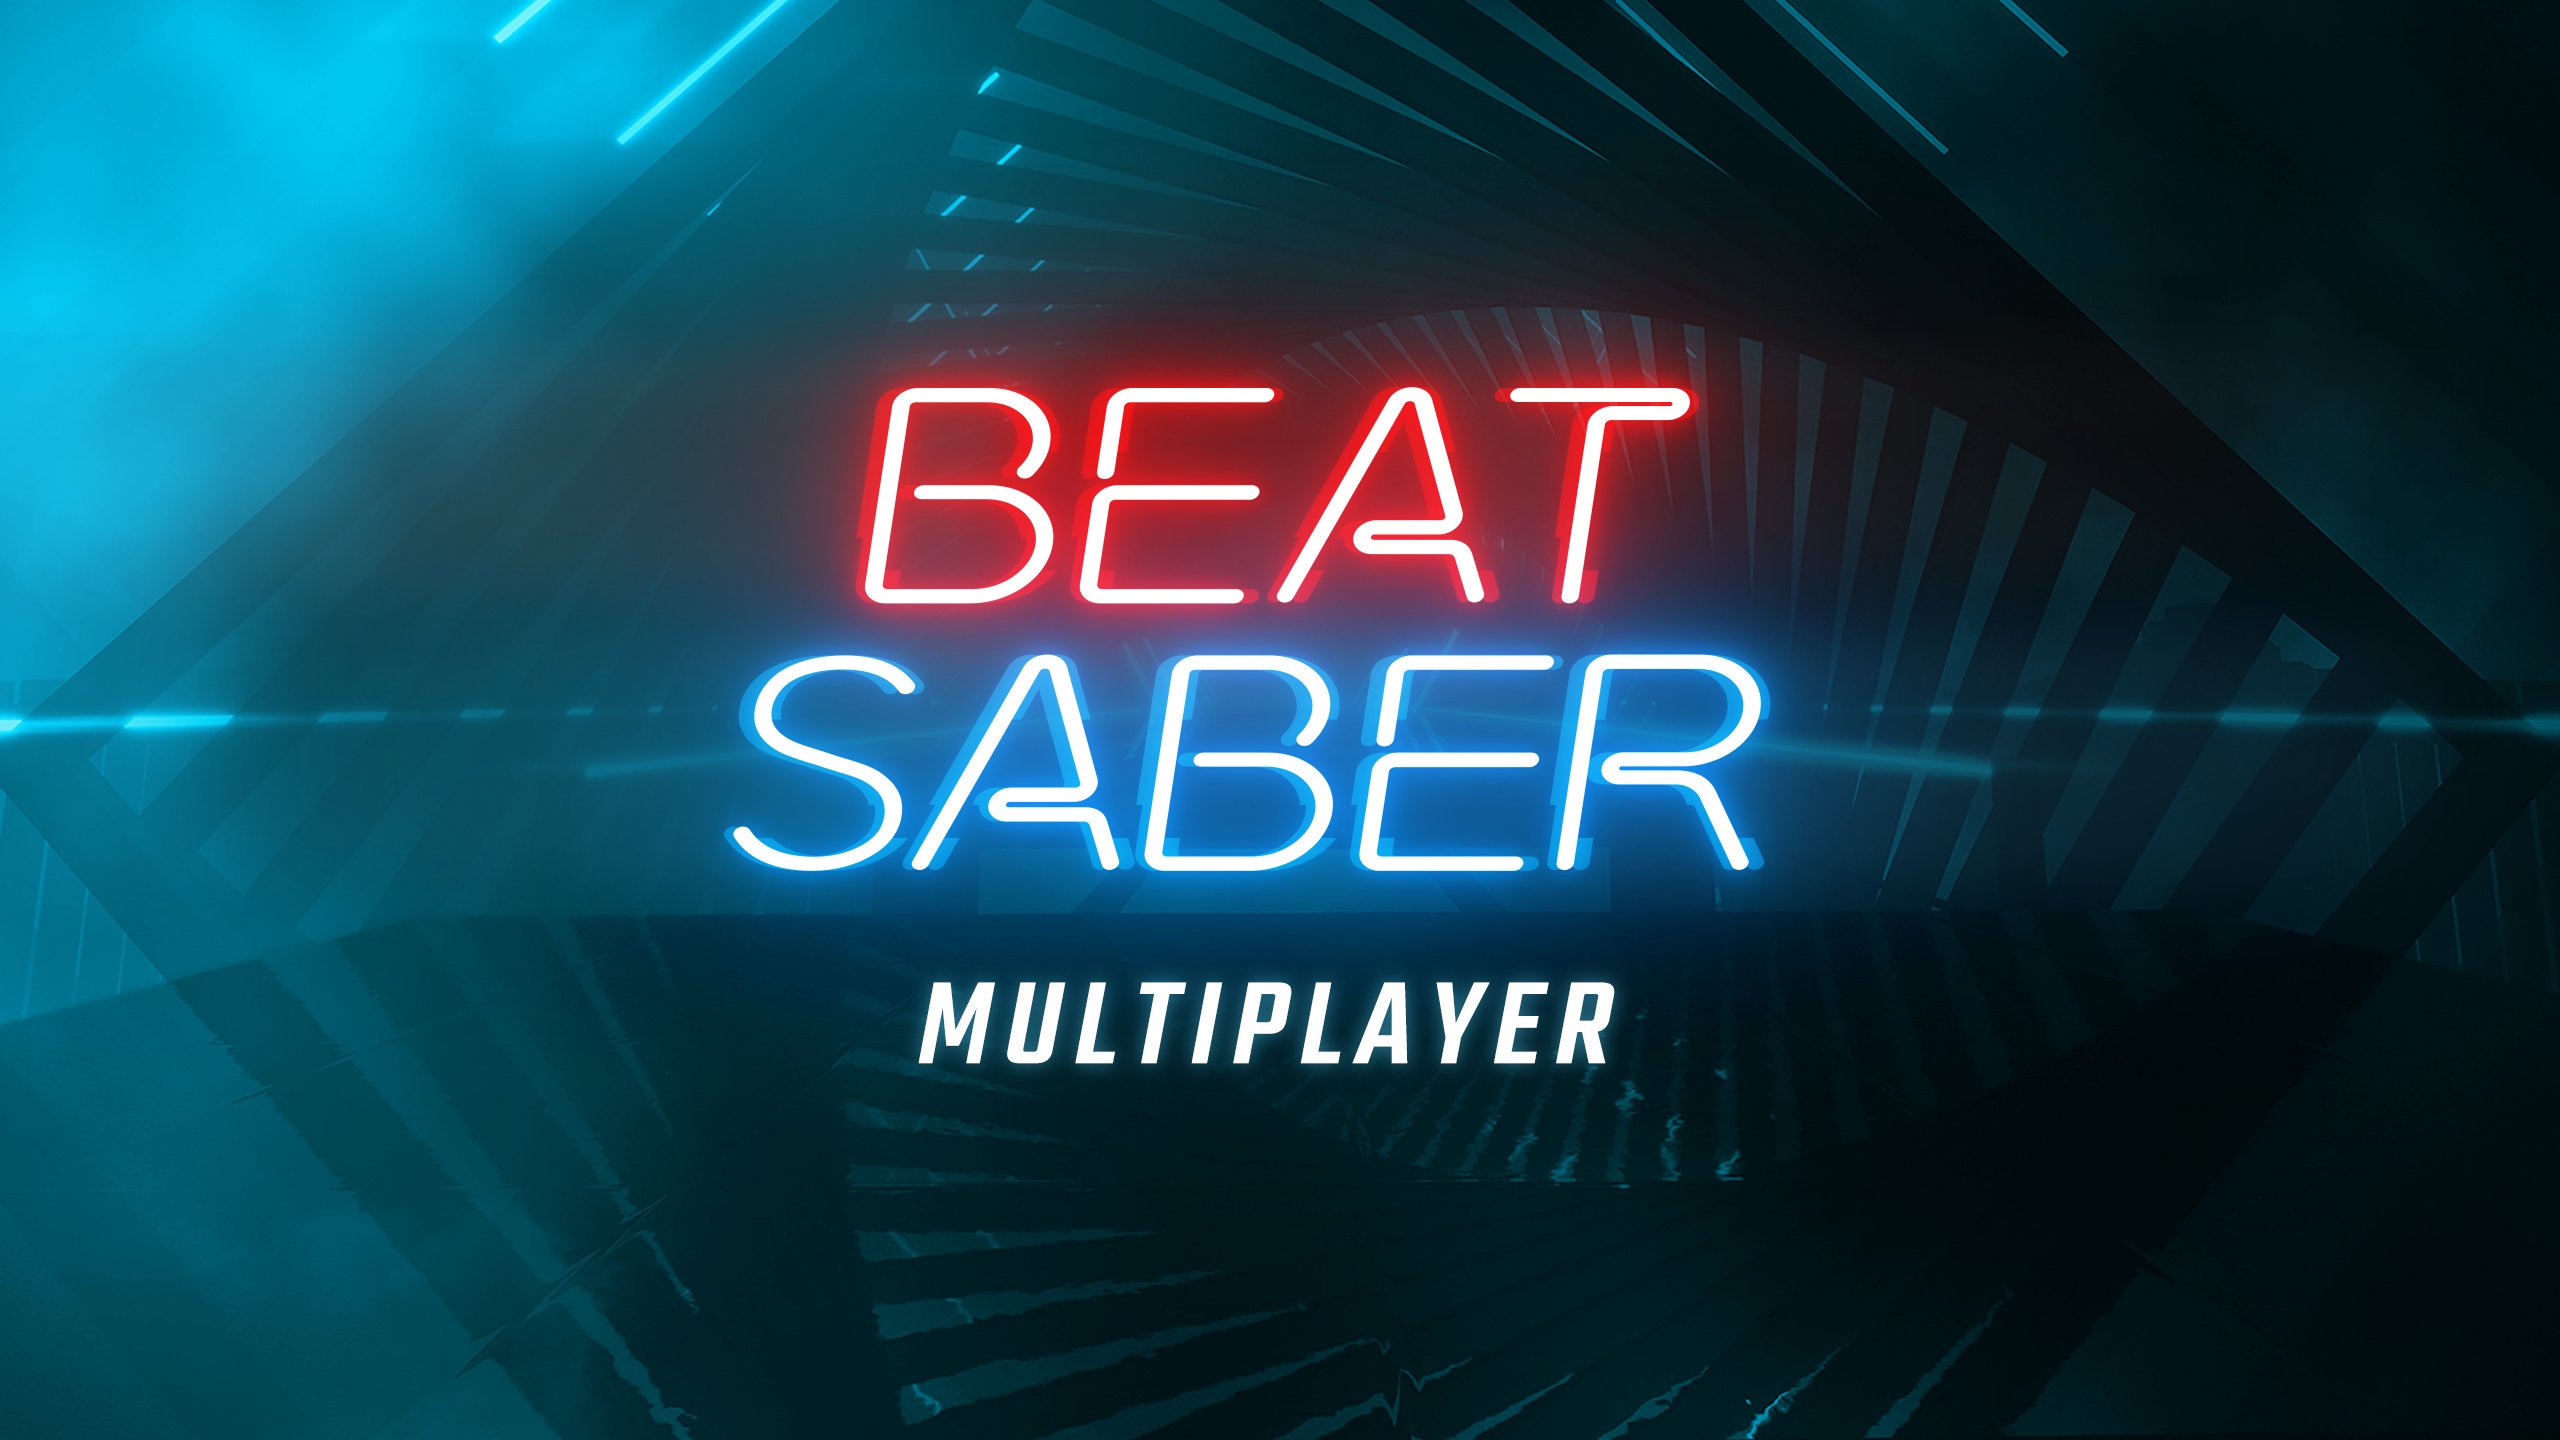 Beat Saber Multiplayer Released On Pc Quest Coming Soon To Psvr Please contact us if you want to publish a beat saber wallpaper on our site. beat saber multiplayer released on pc